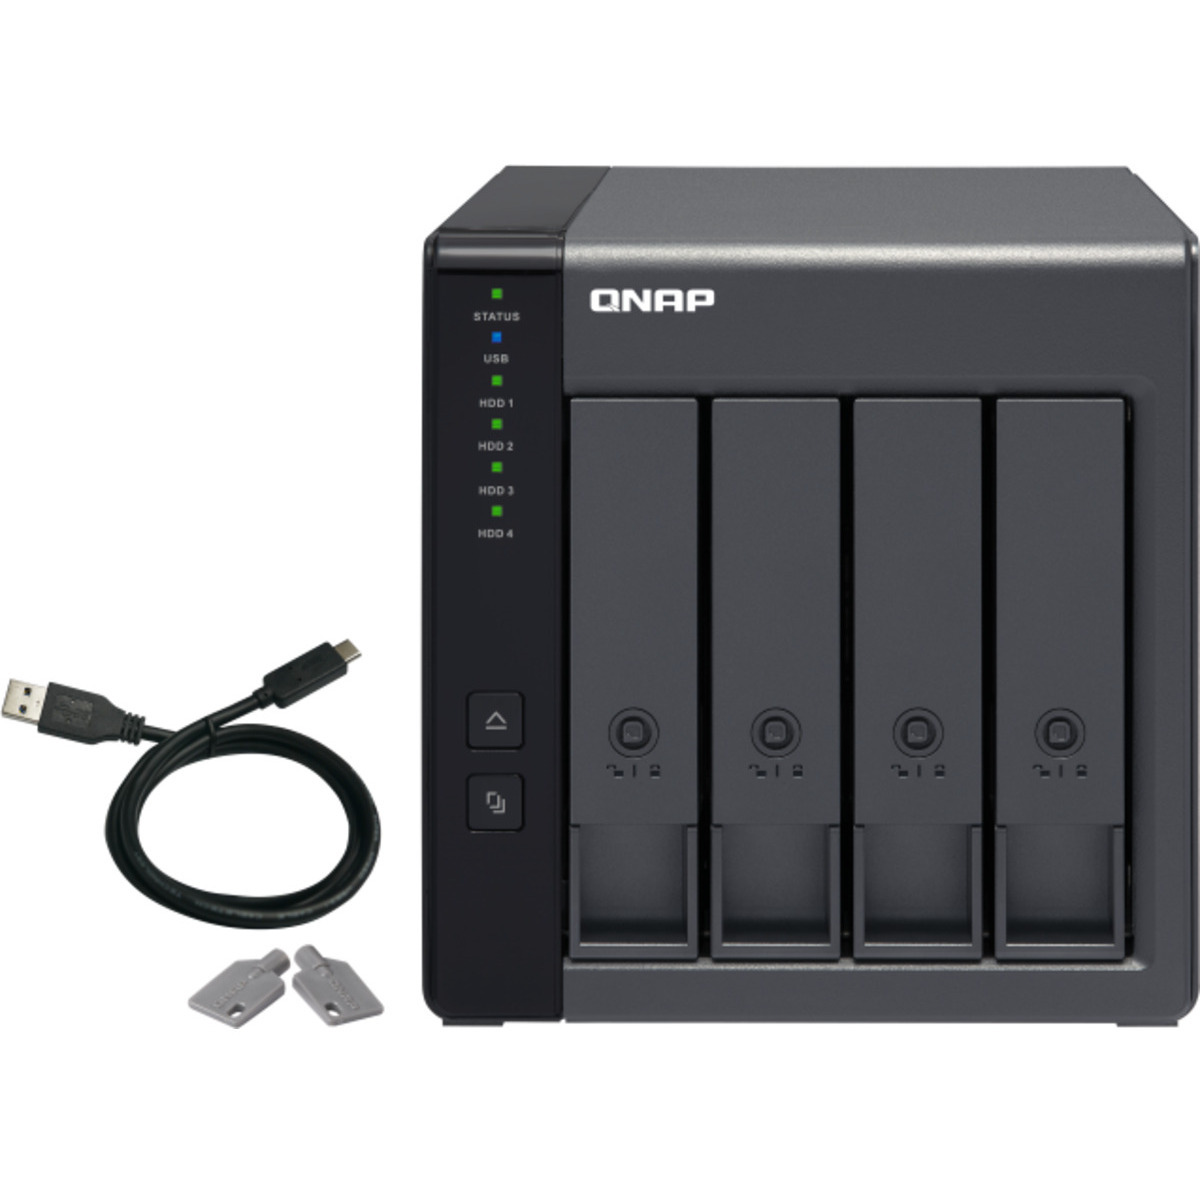 QNAP TR-004 External Expansion Drive 2tb 4-Bay Desktop Multimedia / Power User / Business Expansion Enclosure 4x500gb Crucial MX500 CT500MX500SSD1 2.5 560/510MB/s SATA 6Gb/s SSD CONSUMER Class Drives Installed - Burn-In Tested TR-004 External Expansion Drive